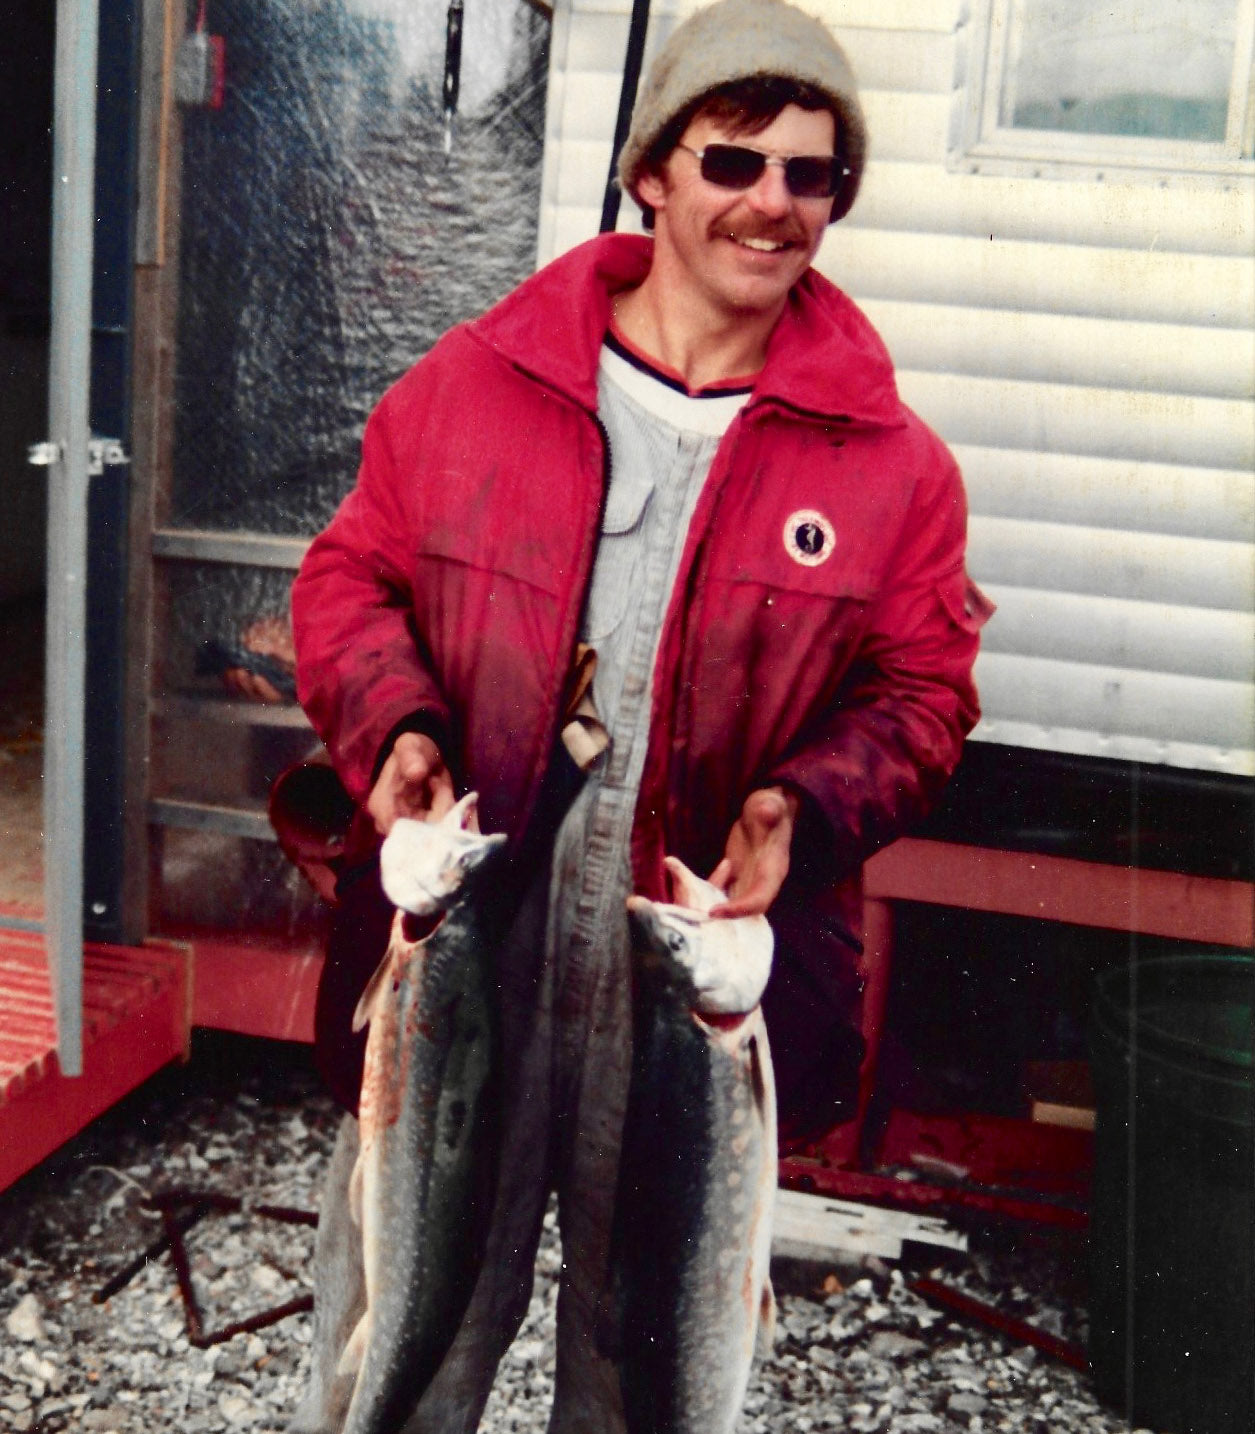 Baffin Island, 1981, fishing for Arctic Char post-dinner while onsite doing environmental assessments